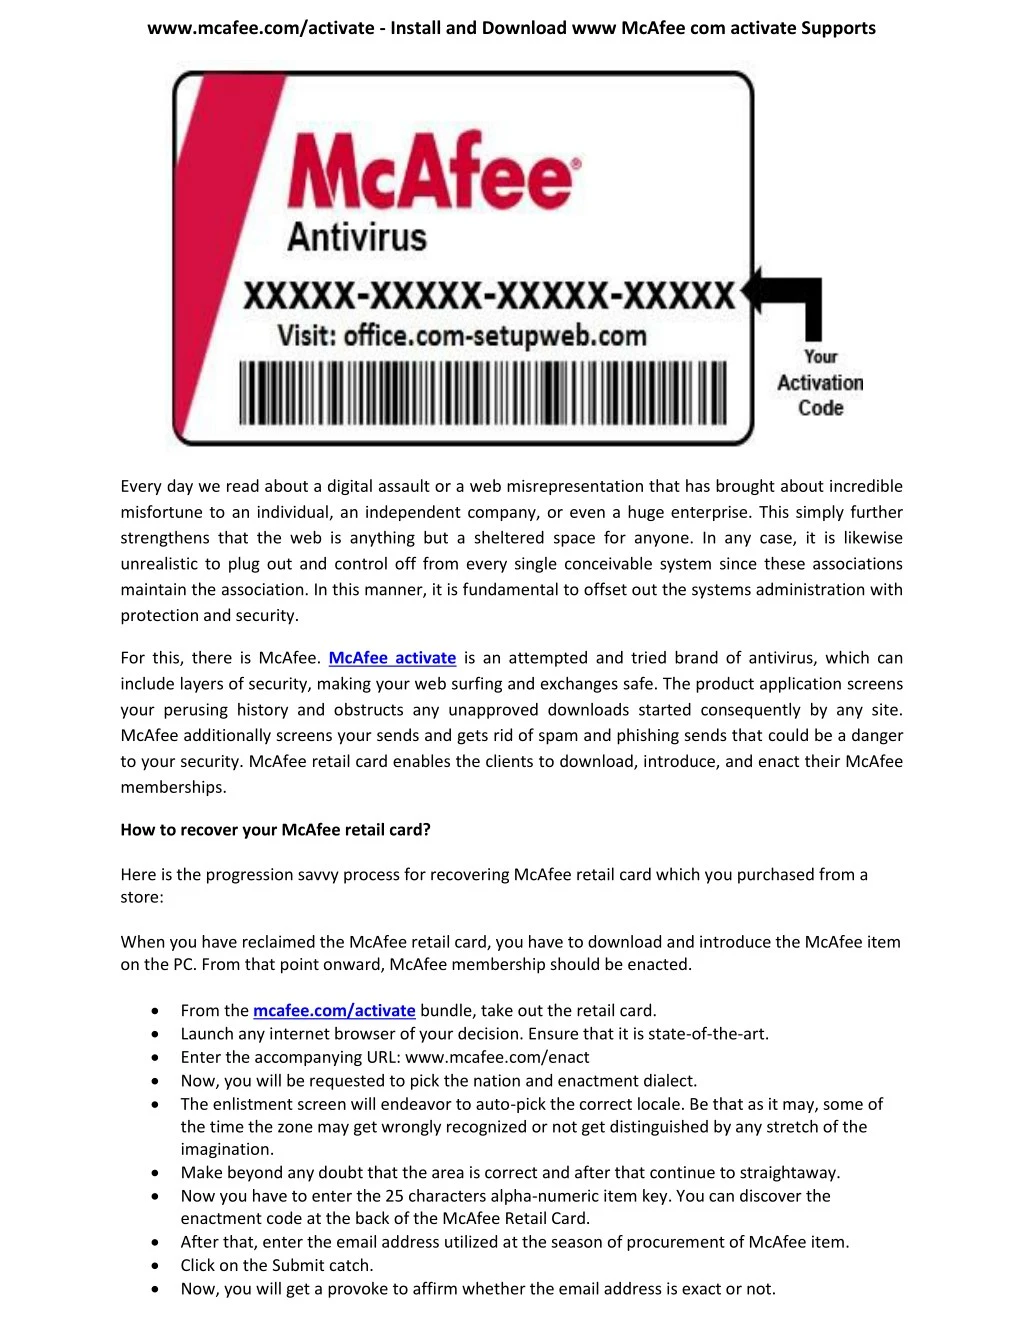 www mcafee com activate install and download